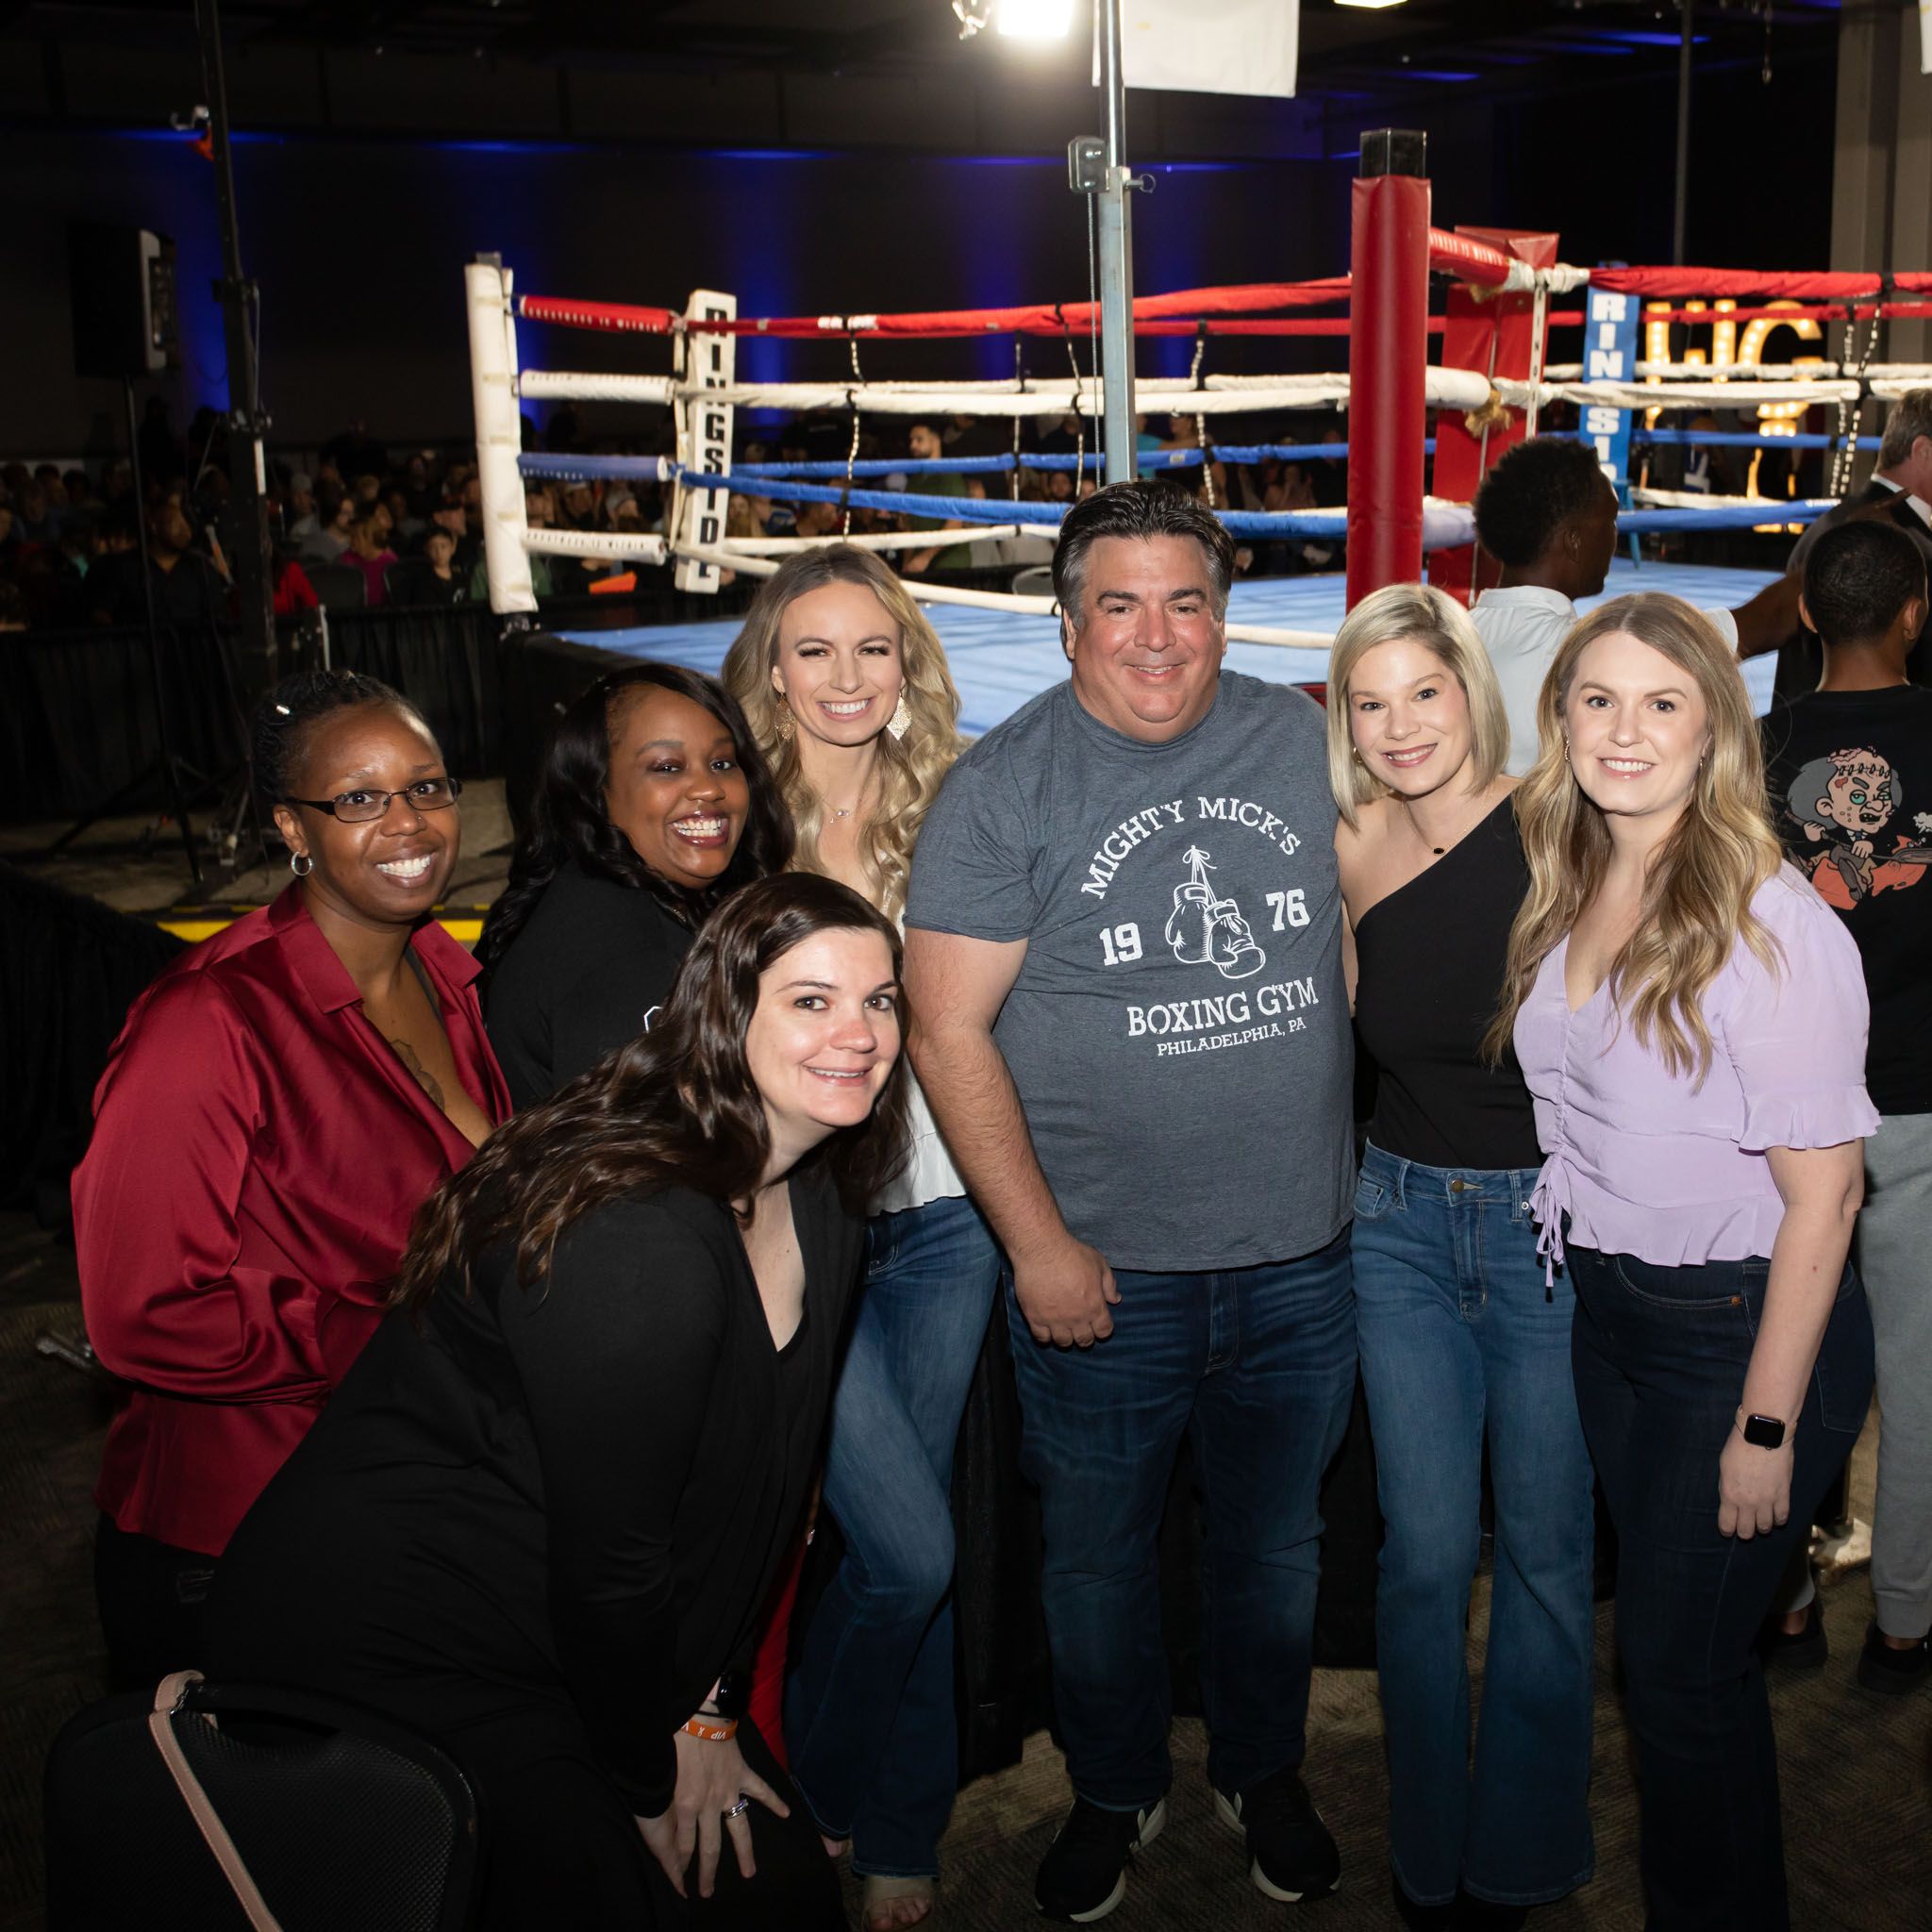 Dr. Smith and Friends Fight Night